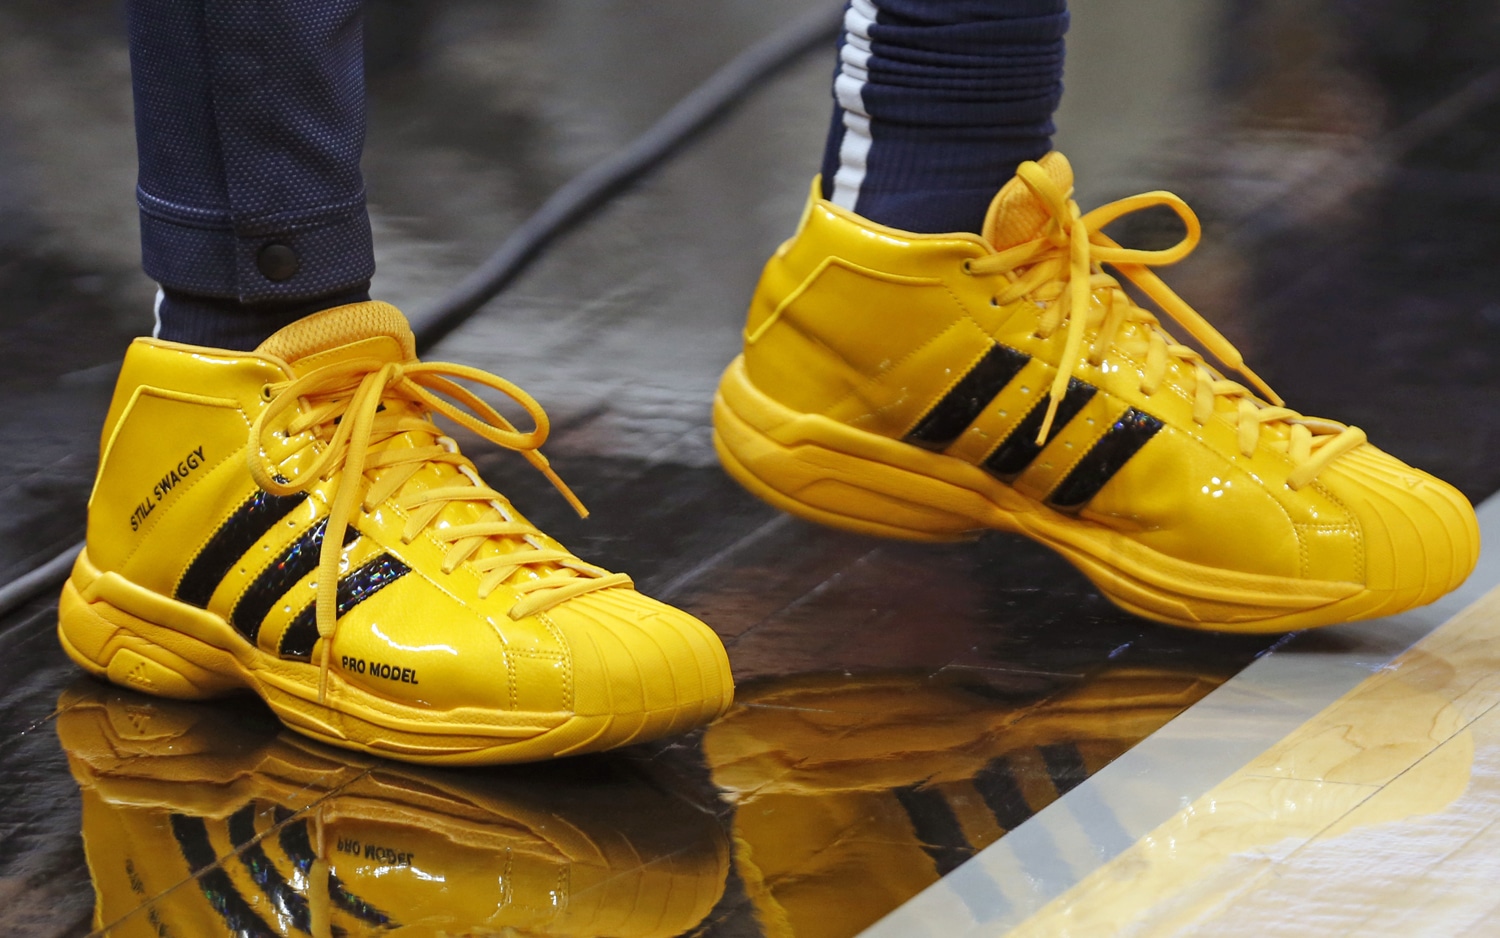 Nick Young adidas Pro Model 2G